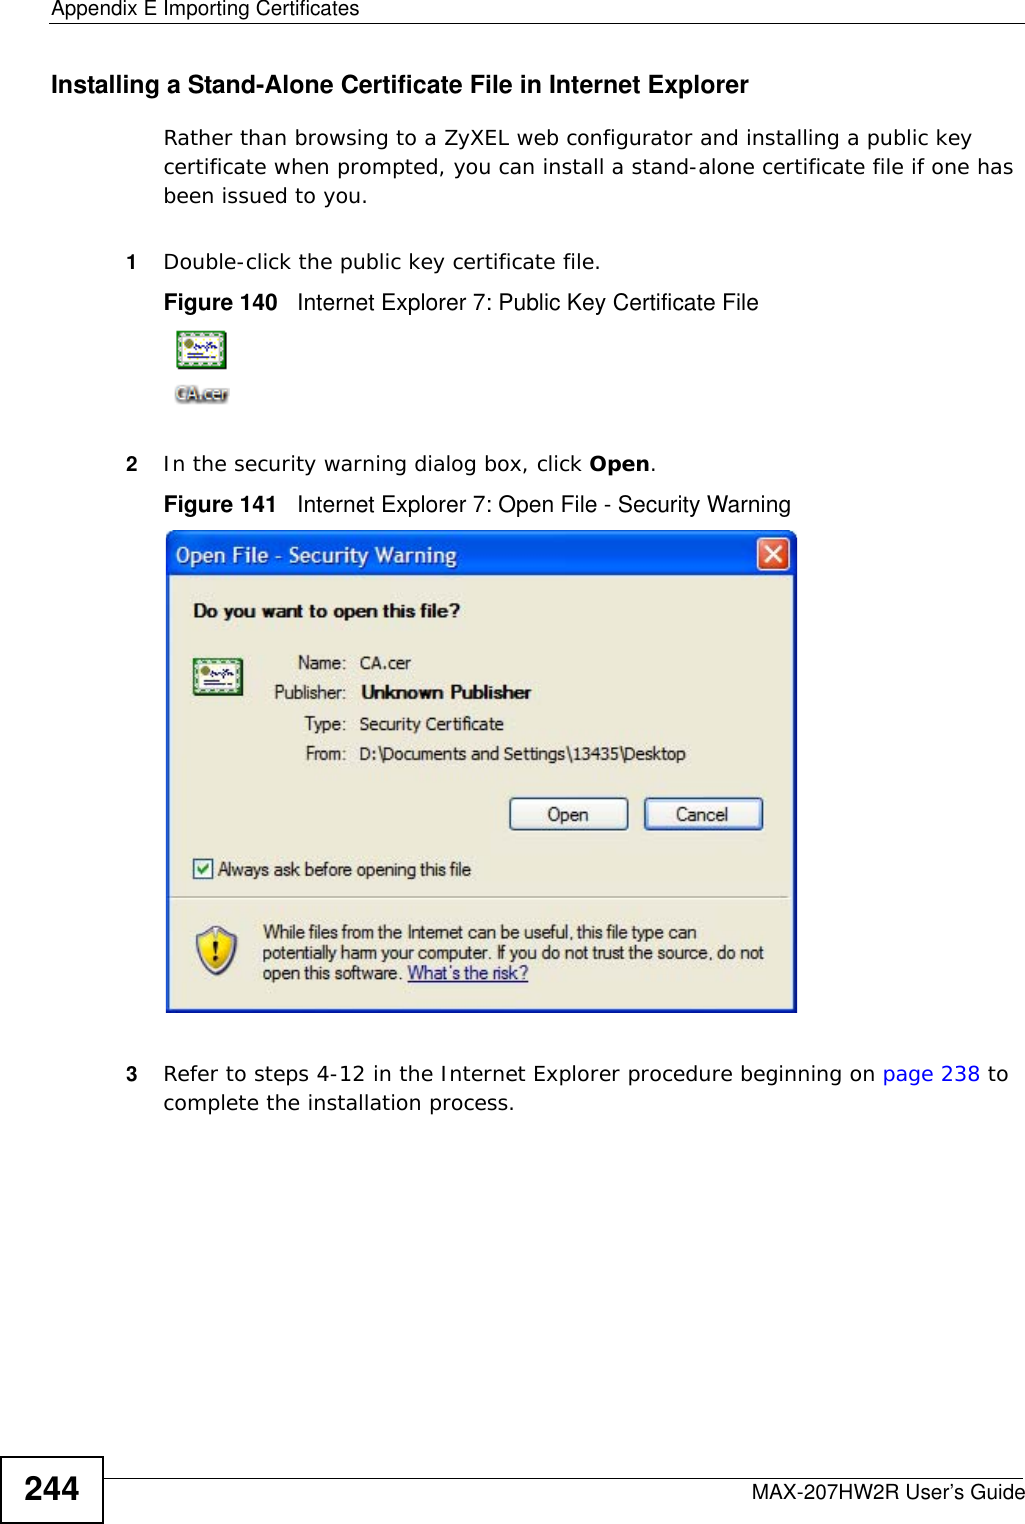 Appendix E Importing CertificatesMAX-207HW2R User’s Guide244Installing a Stand-Alone Certificate File in Internet ExplorerRather than browsing to a ZyXEL web configurator and installing a public key certificate when prompted, you can install a stand-alone certificate file if one has been issued to you.1Double-click the public key certificate file.Figure 140   Internet Explorer 7: Public Key Certificate File2In the security warning dialog box, click Open.Figure 141   Internet Explorer 7: Open File - Security Warning3Refer to steps 4-12 in the Internet Explorer procedure beginning on page 238 to complete the installation process.